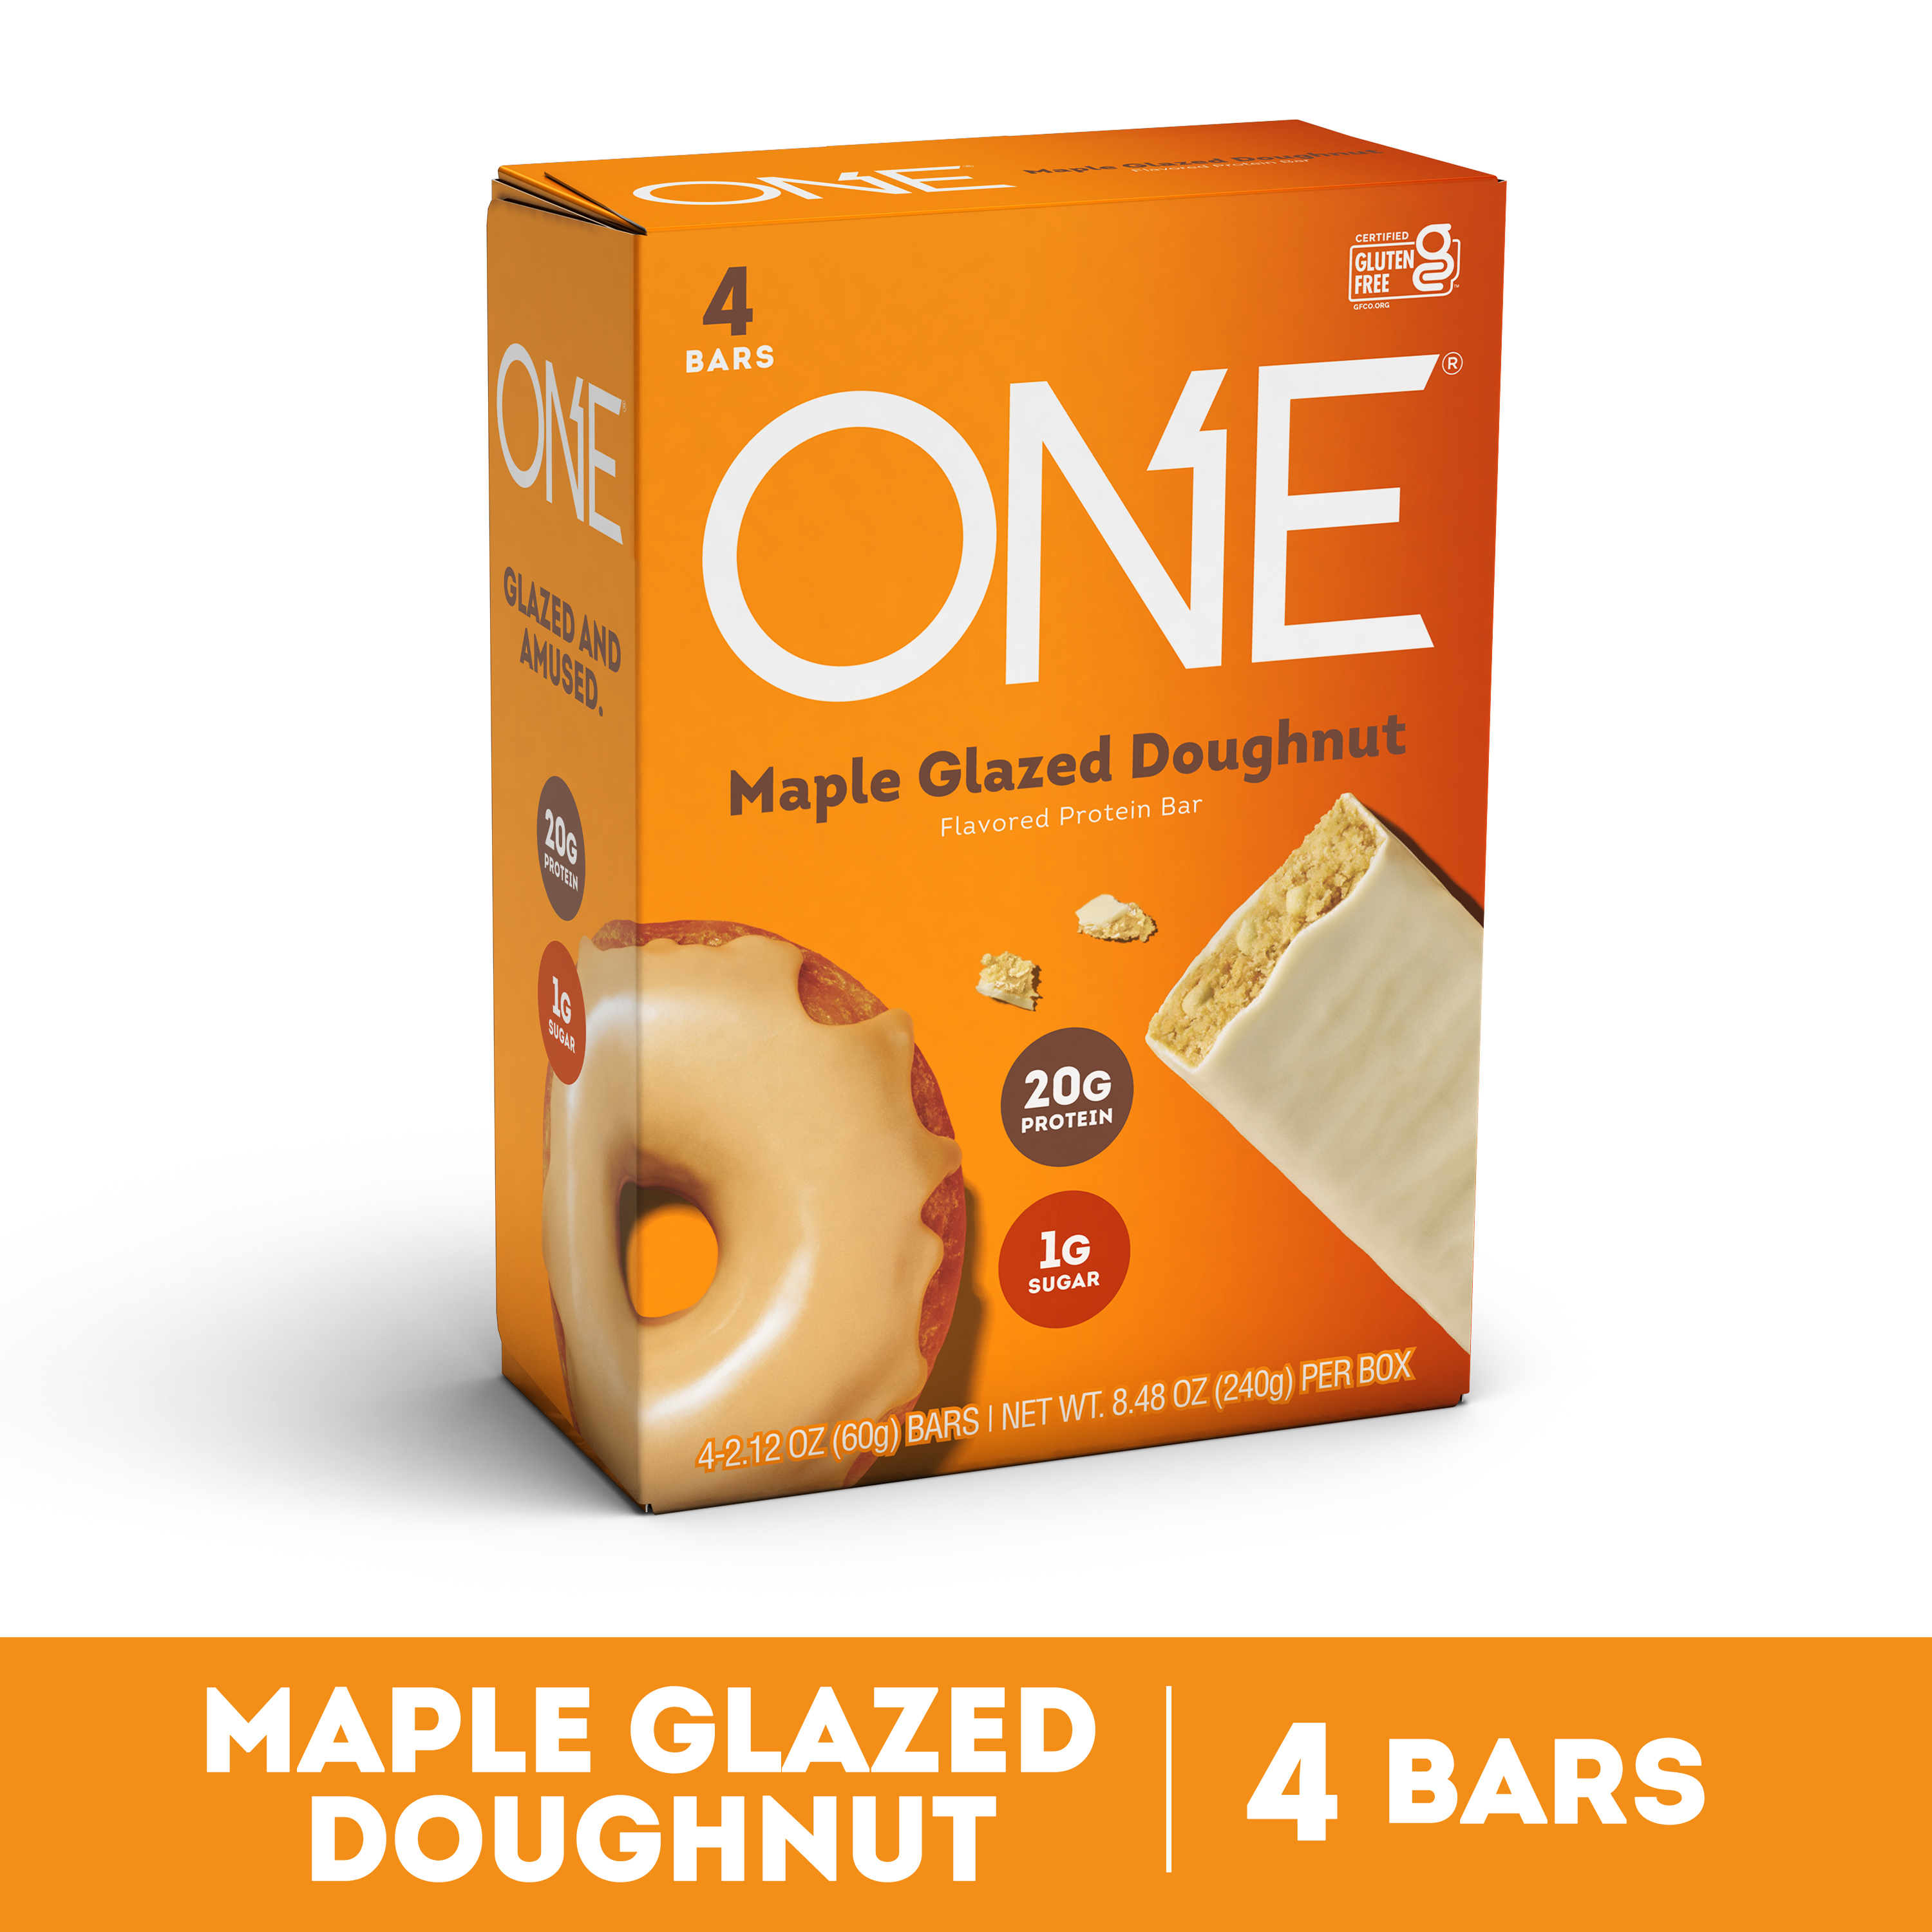 One Protein Bar, Maple Glazed Doughnut, 20g Protein, 4 Count - image 1 of 5